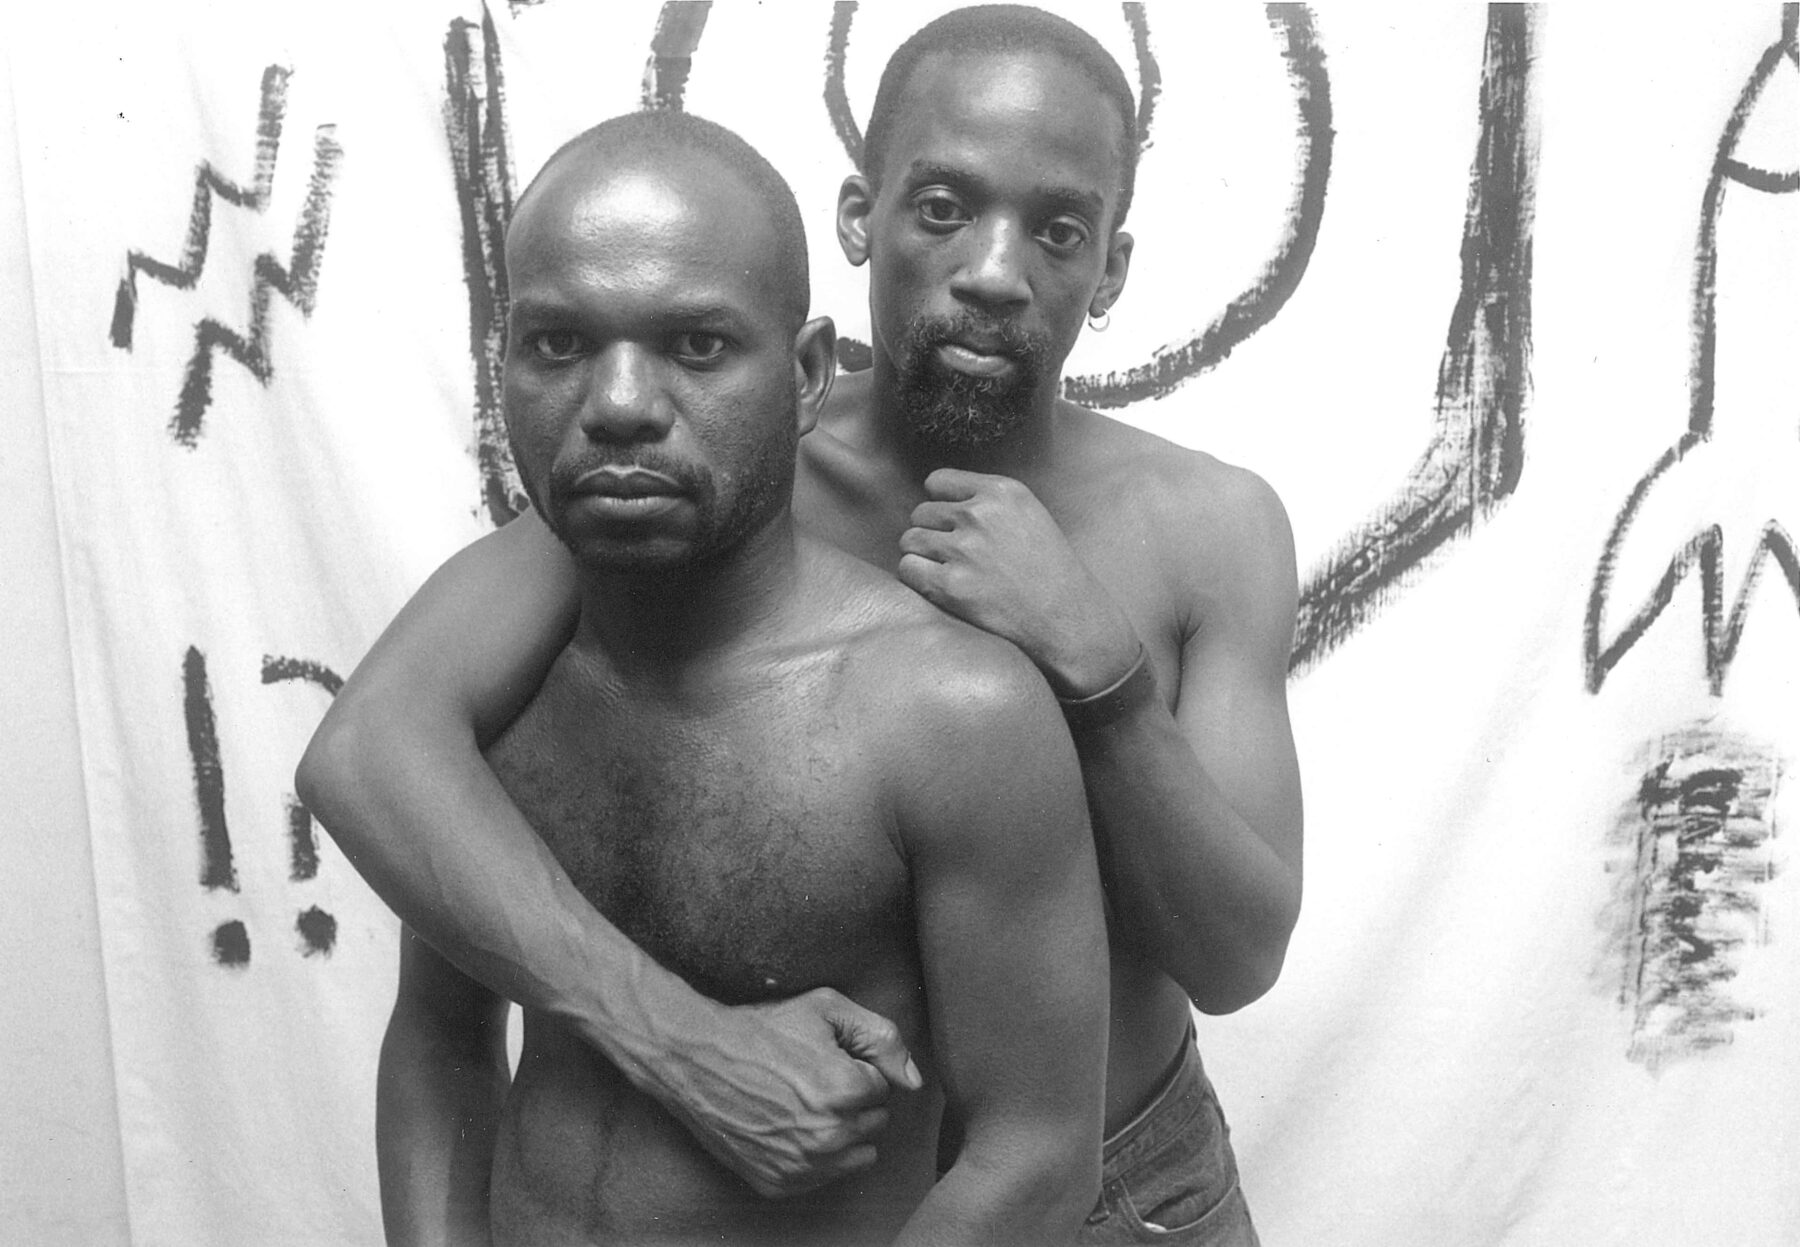 Legendary Marlon Riggs speaks to the modern-day Black gay experience